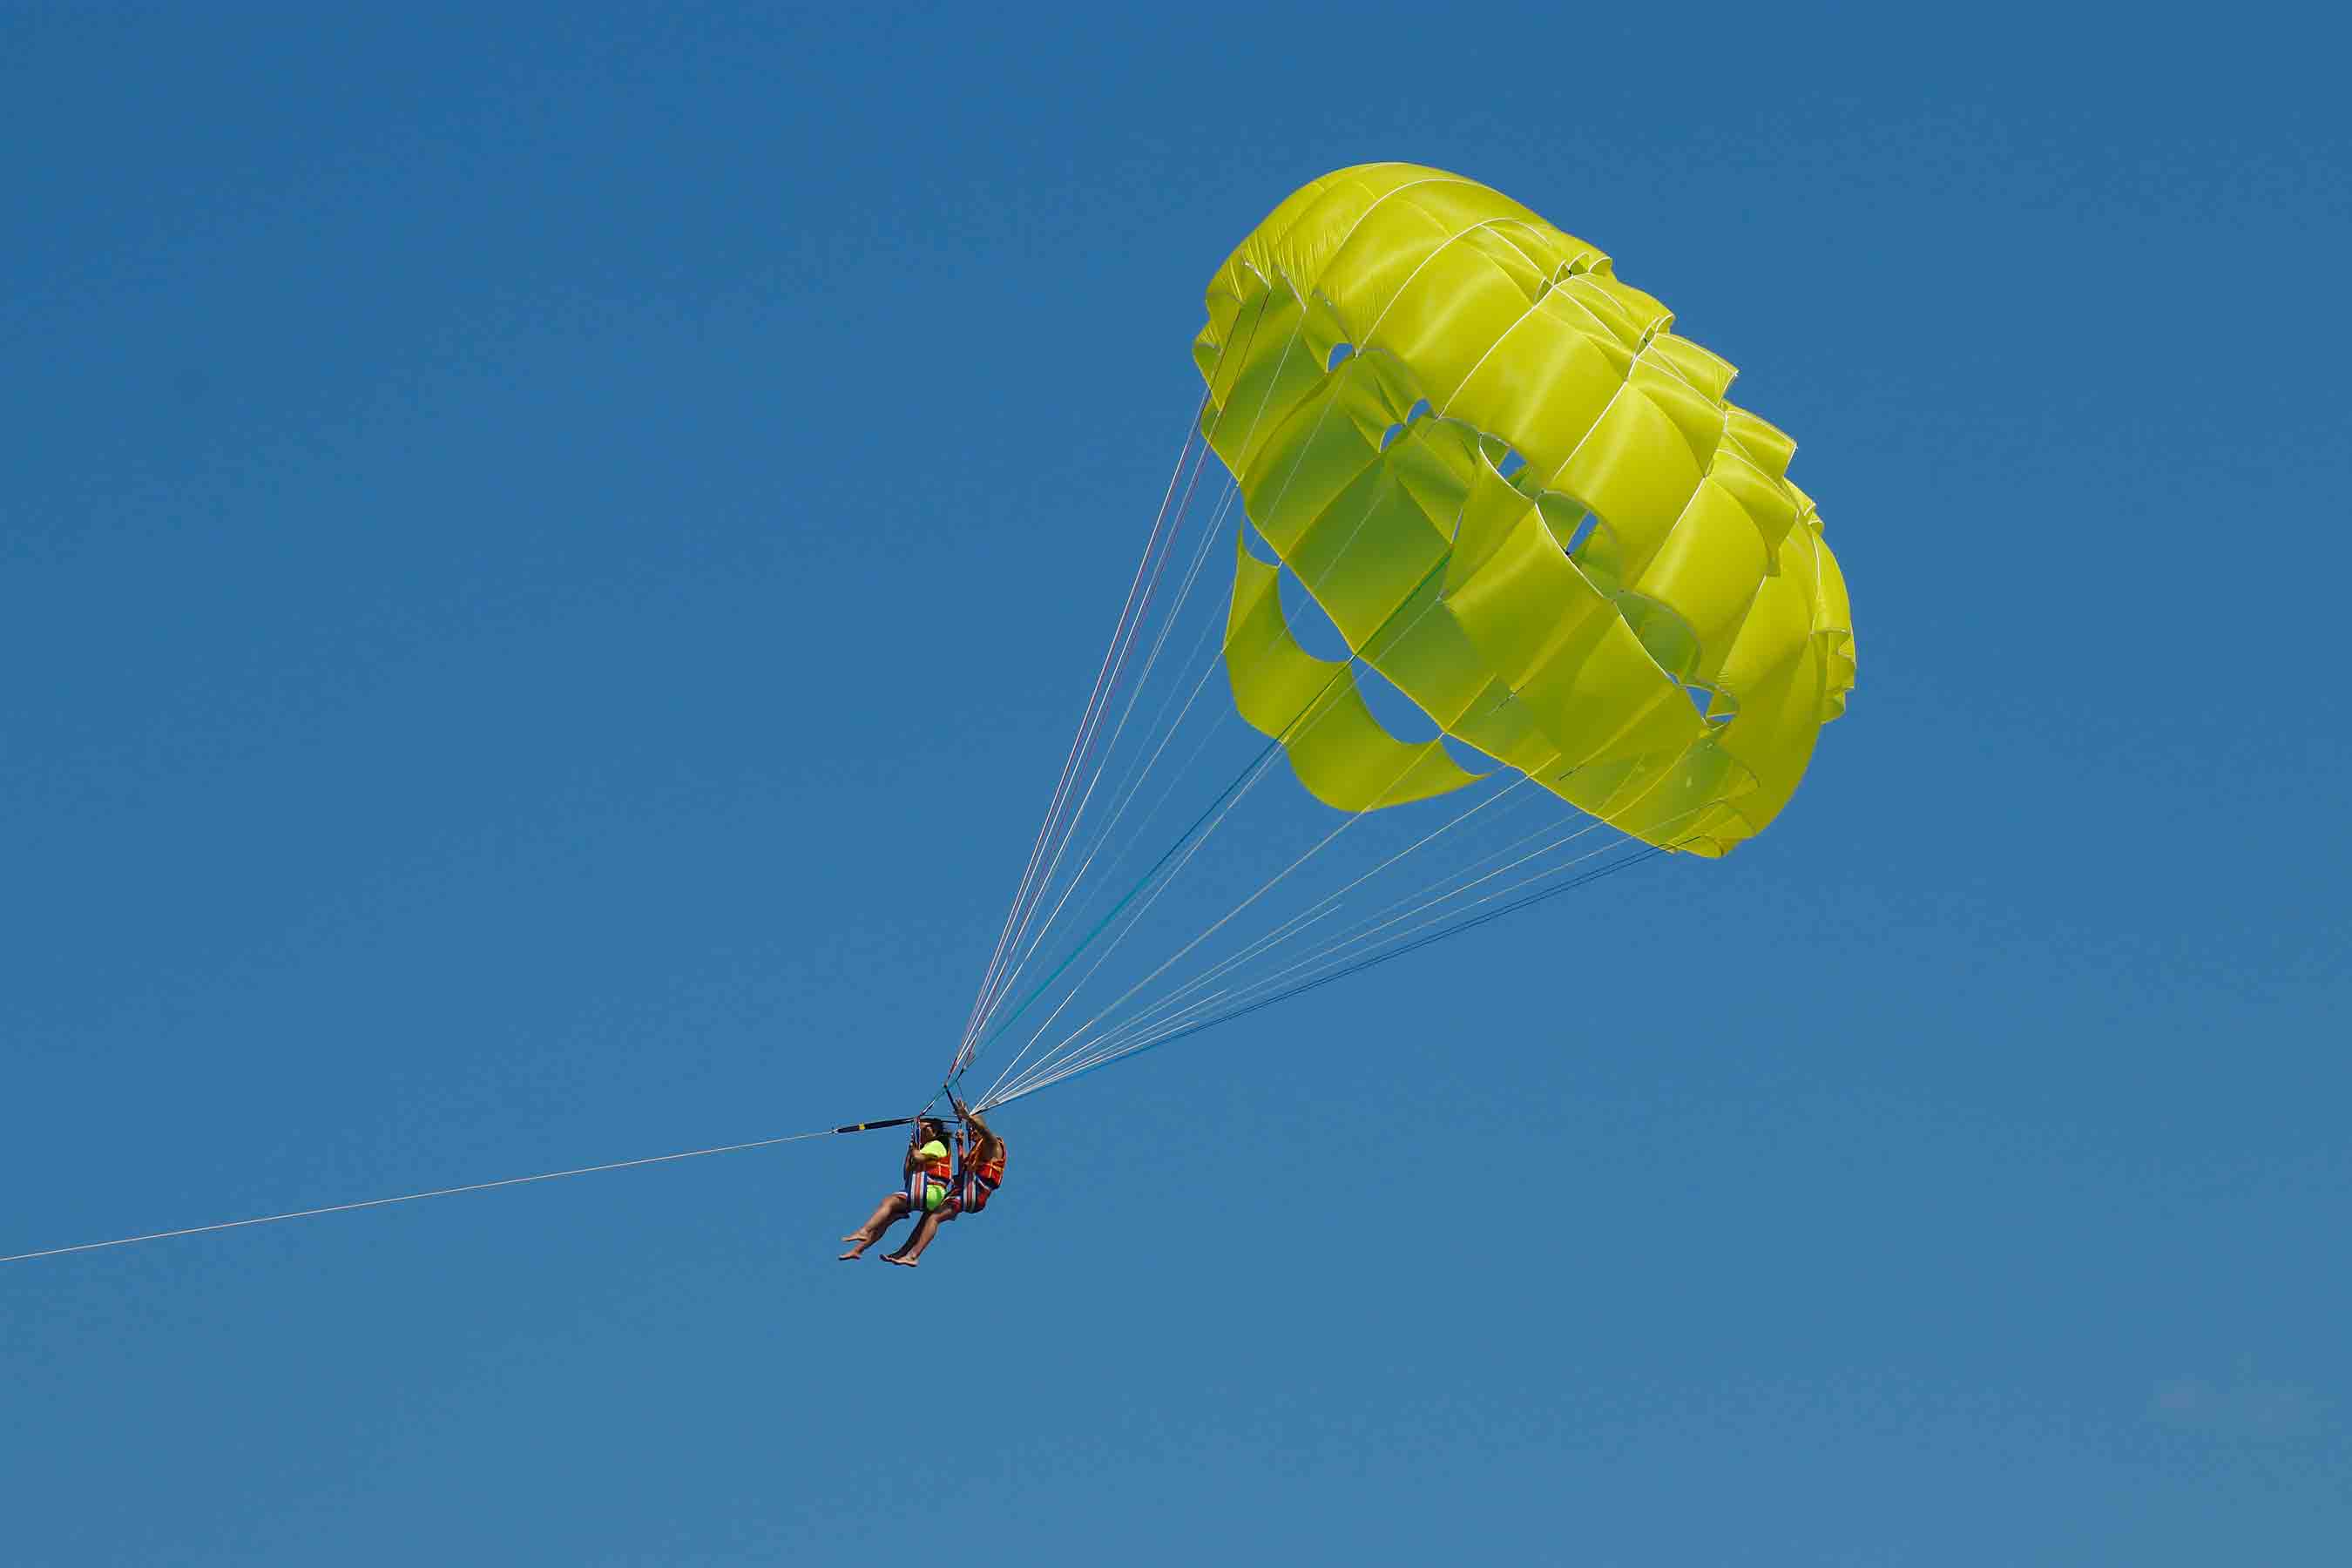 Two Person Doing A Parasailing Activity